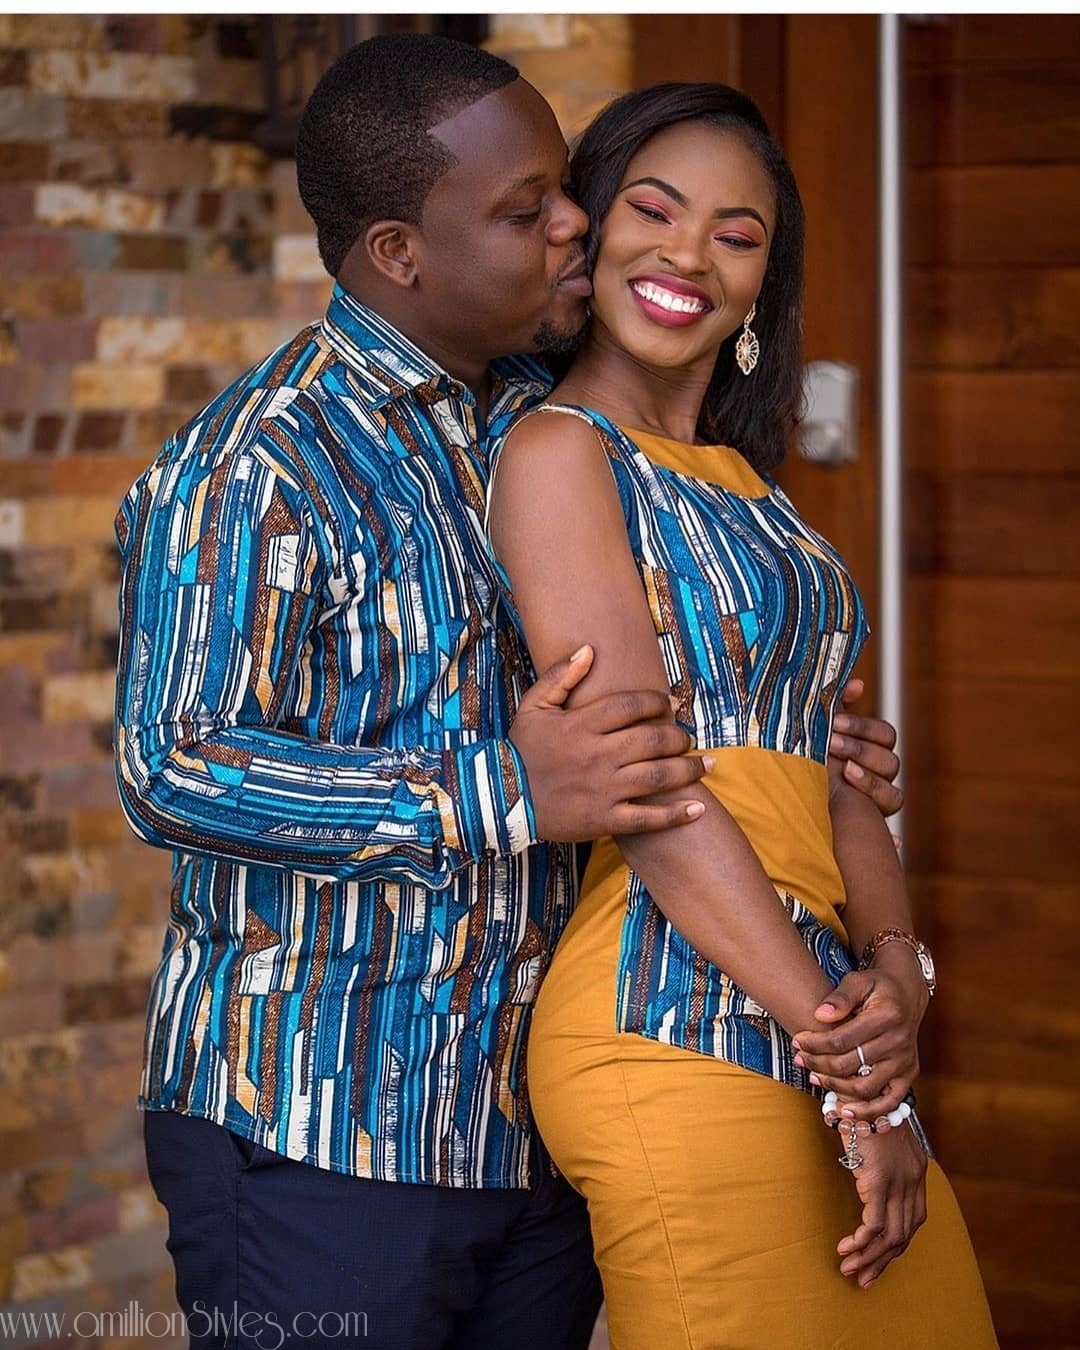 Would You Like To Twin With Bae? These Styles Are Great For Pre-Wedding Outfits